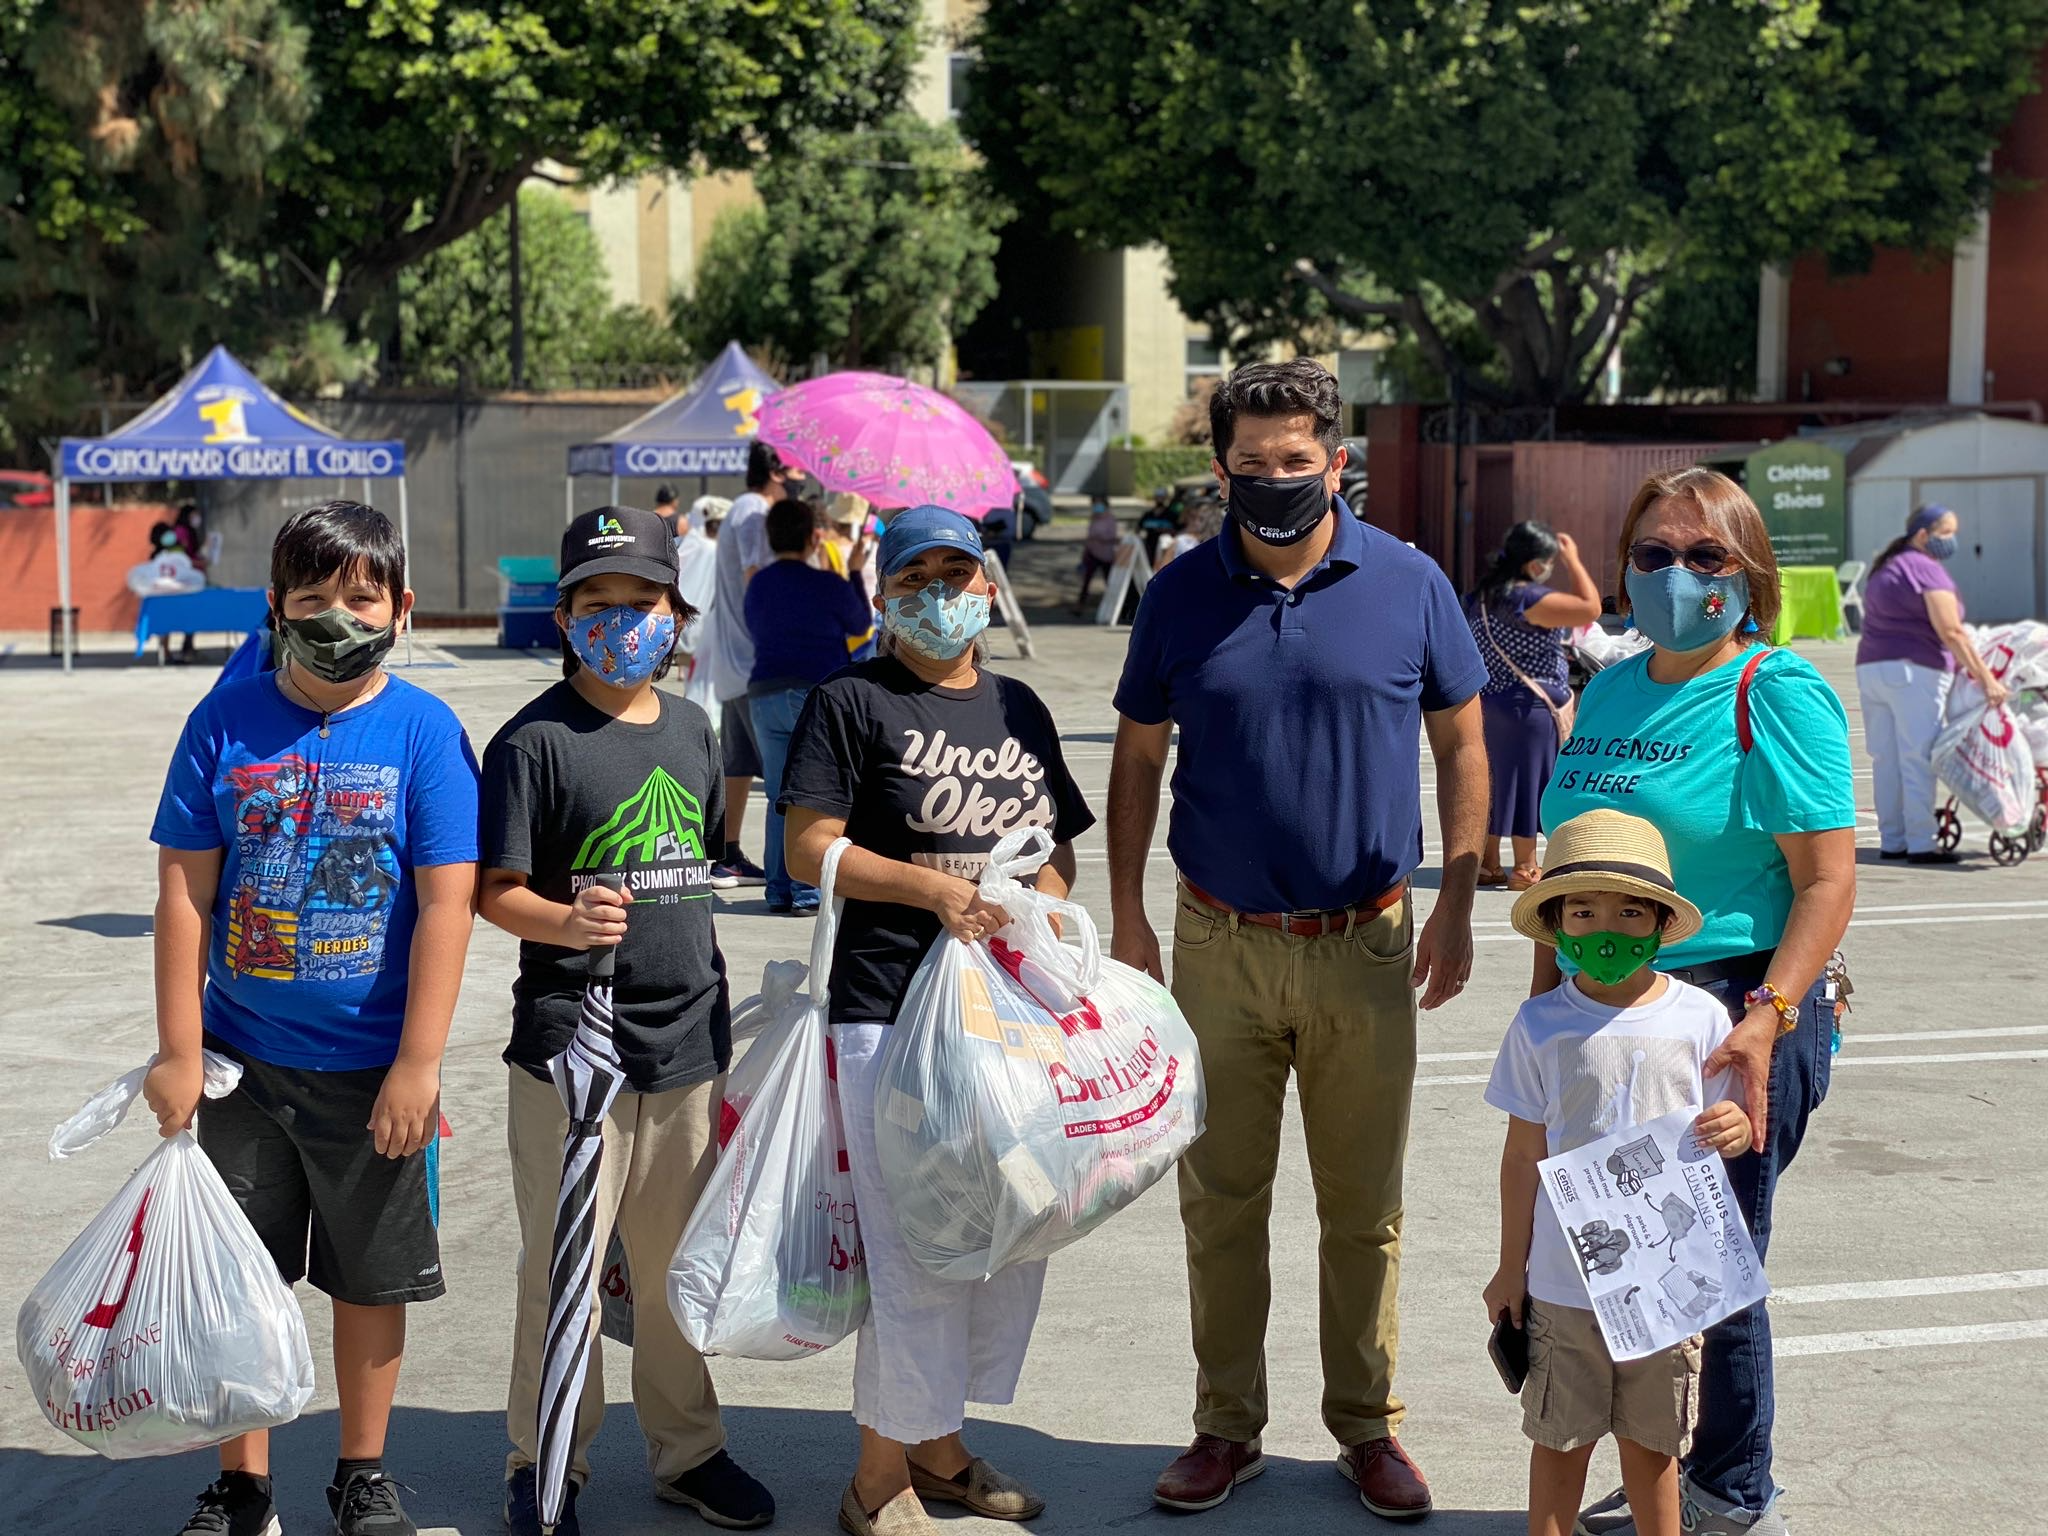 Congressman Gomez distributes clothing and Census information to families in Westlake